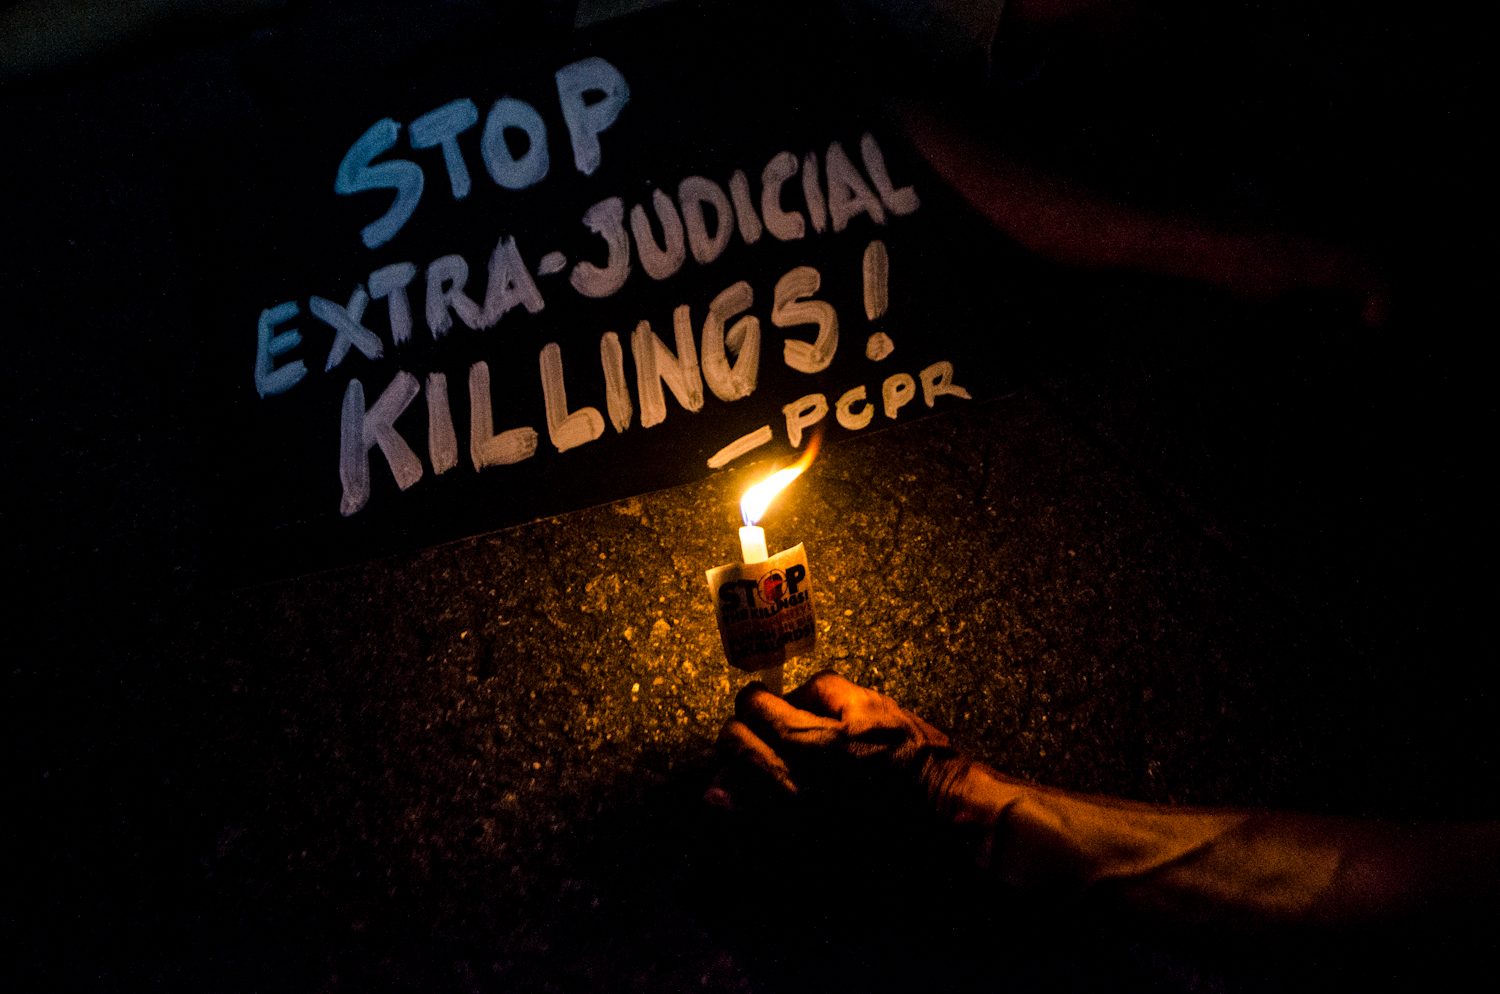 House committee drops use of ‘extrajudicial killings’ in probes, reports